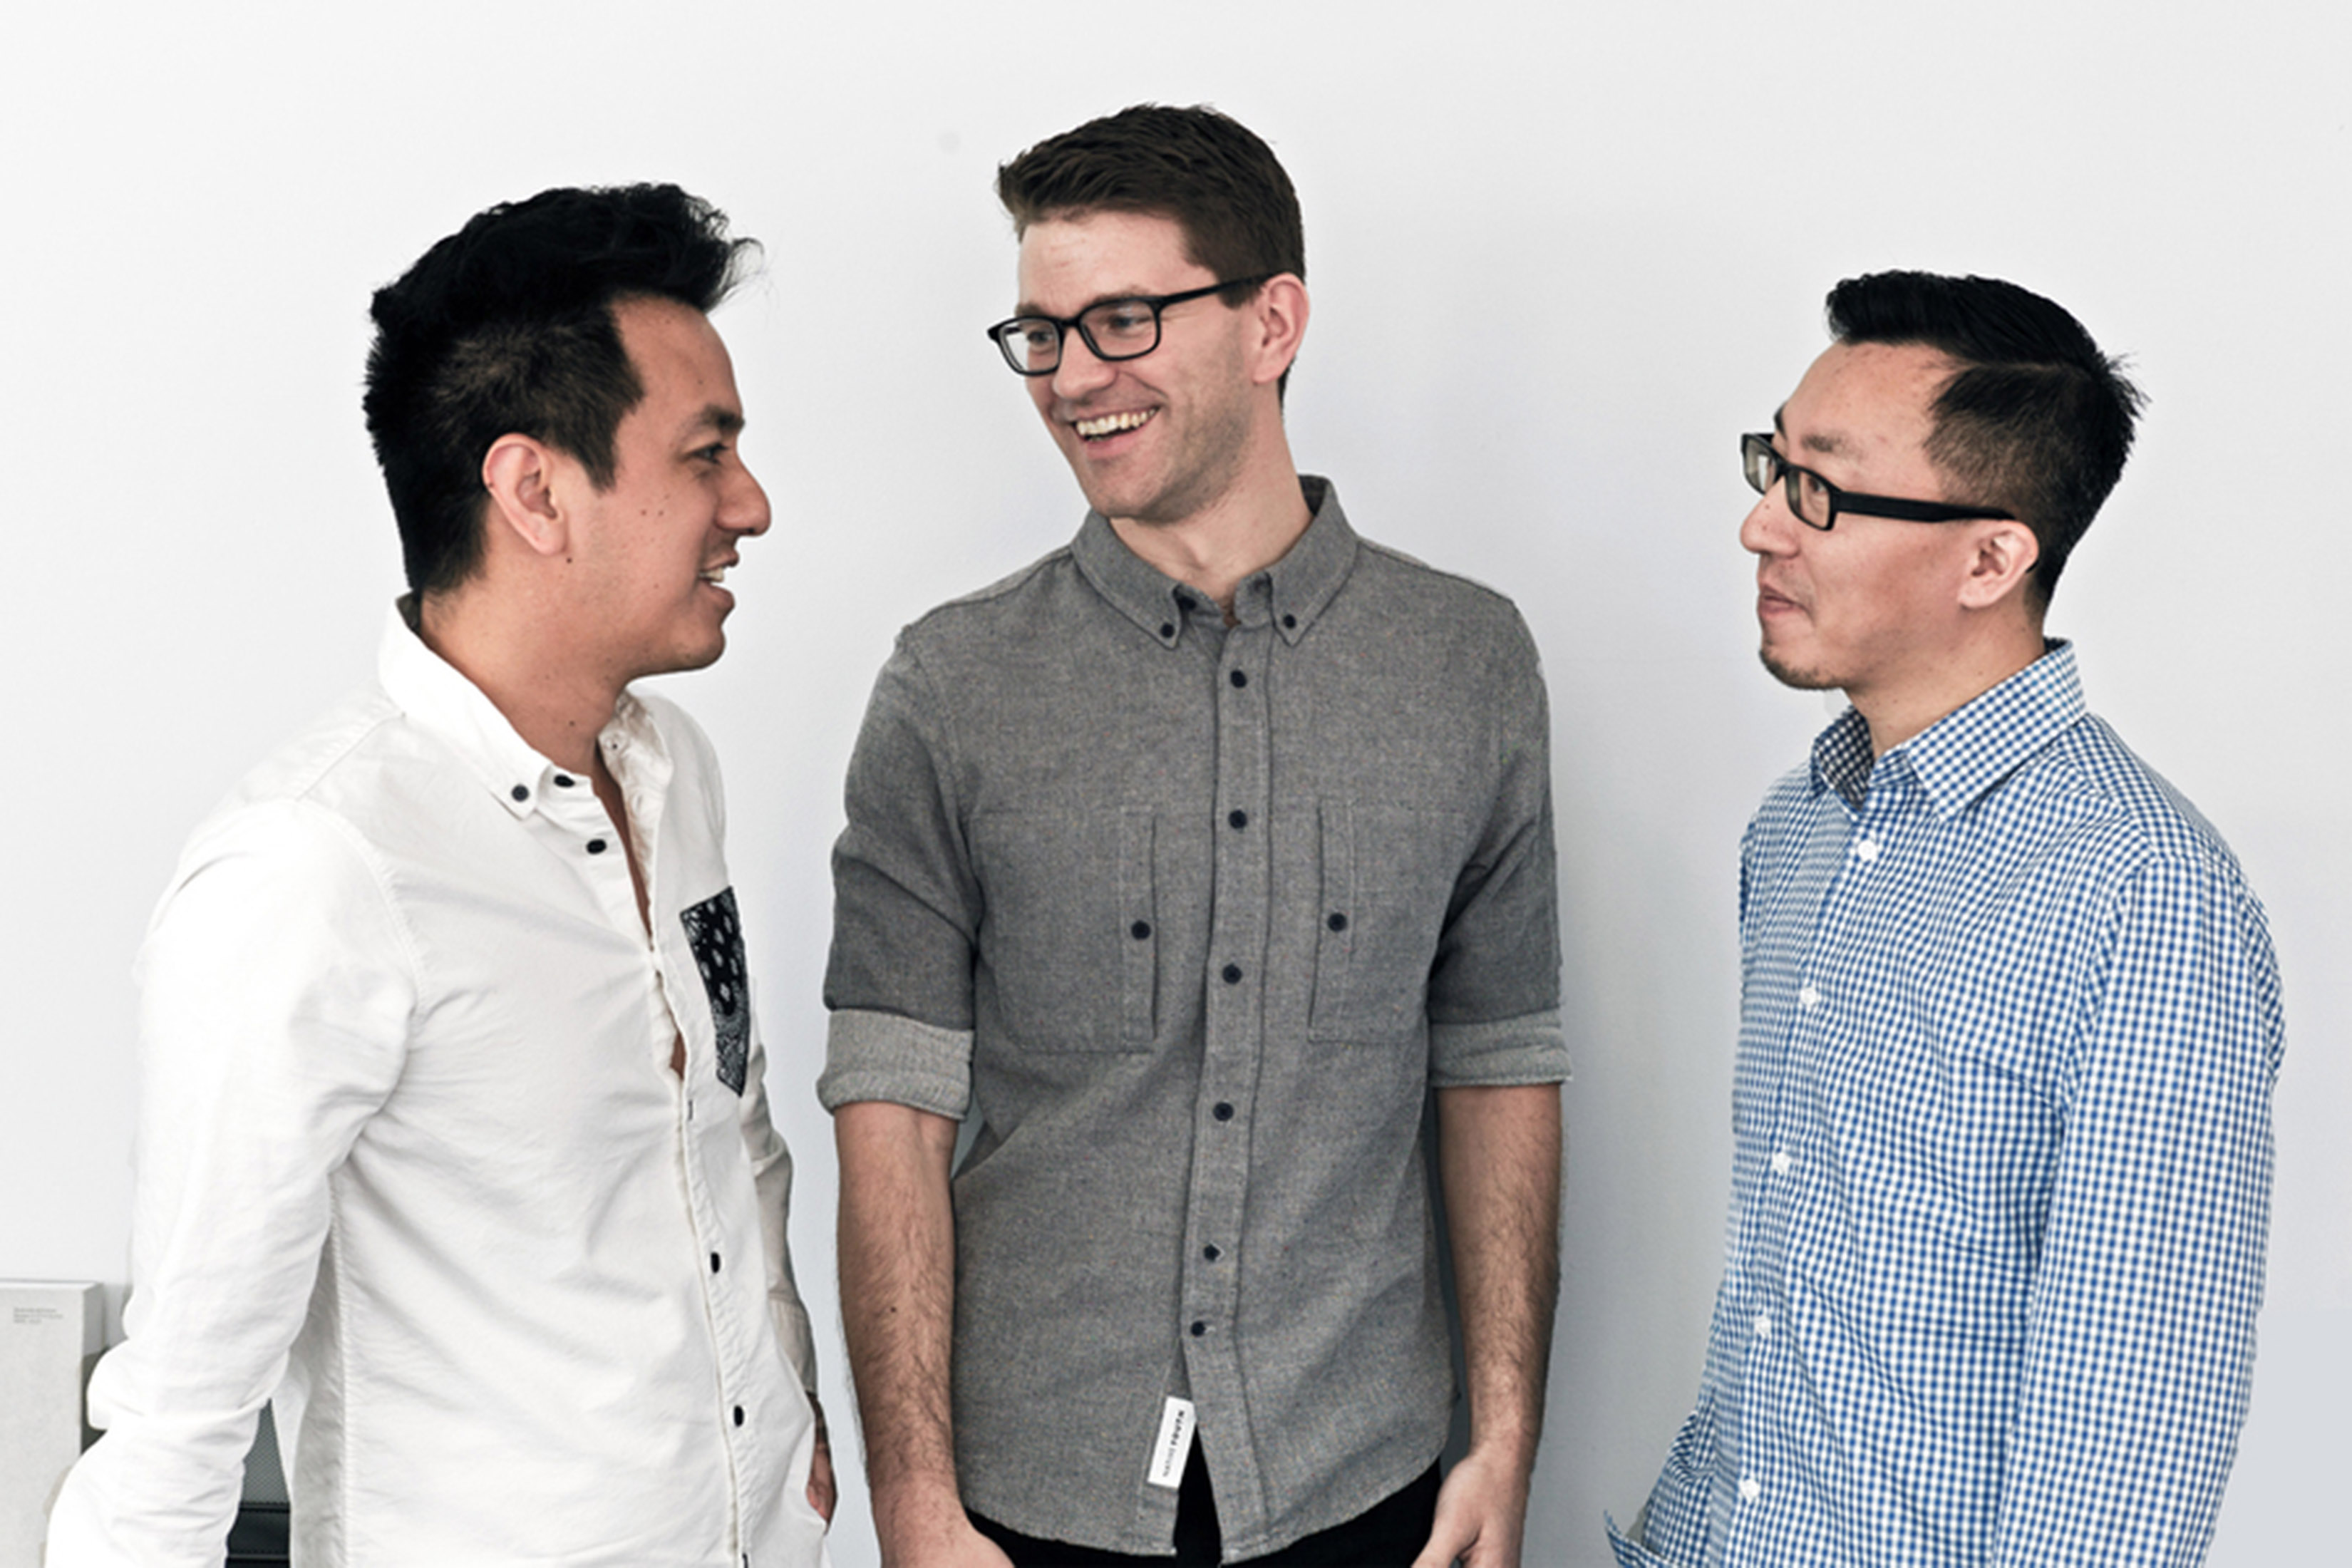 Moe Amaya, Alex Dixon, and Robert Yuen (L-R) appear in casual conversation. Background is a white wall.